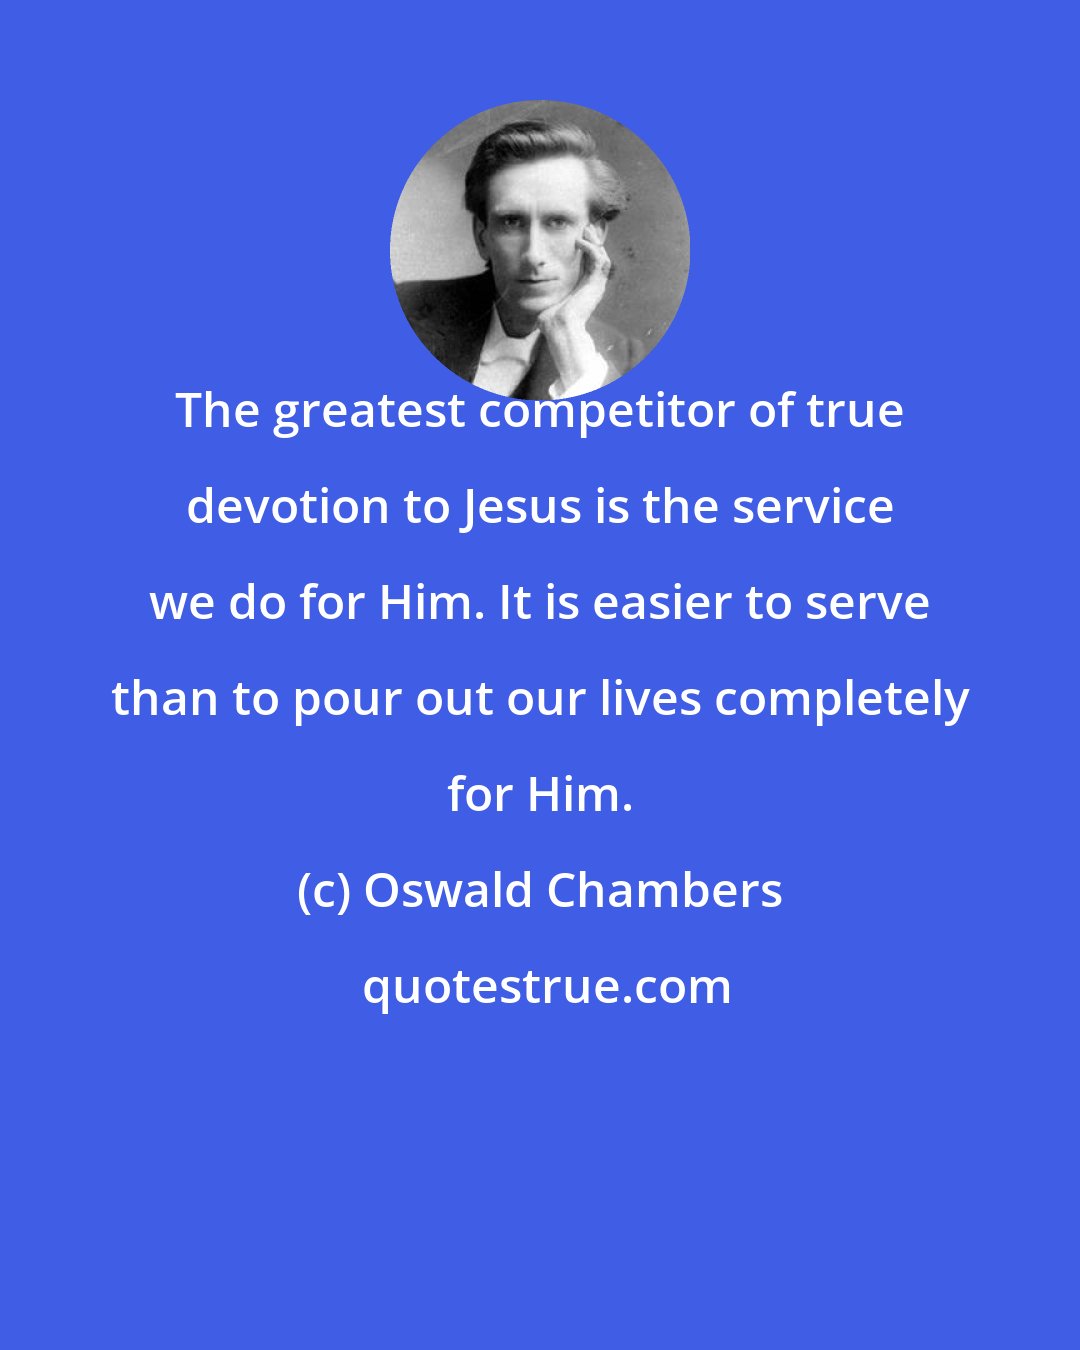 Oswald Chambers: The greatest competitor of true devotion to Jesus is the service we do for Him. It is easier to serve than to pour out our lives completely for Him.